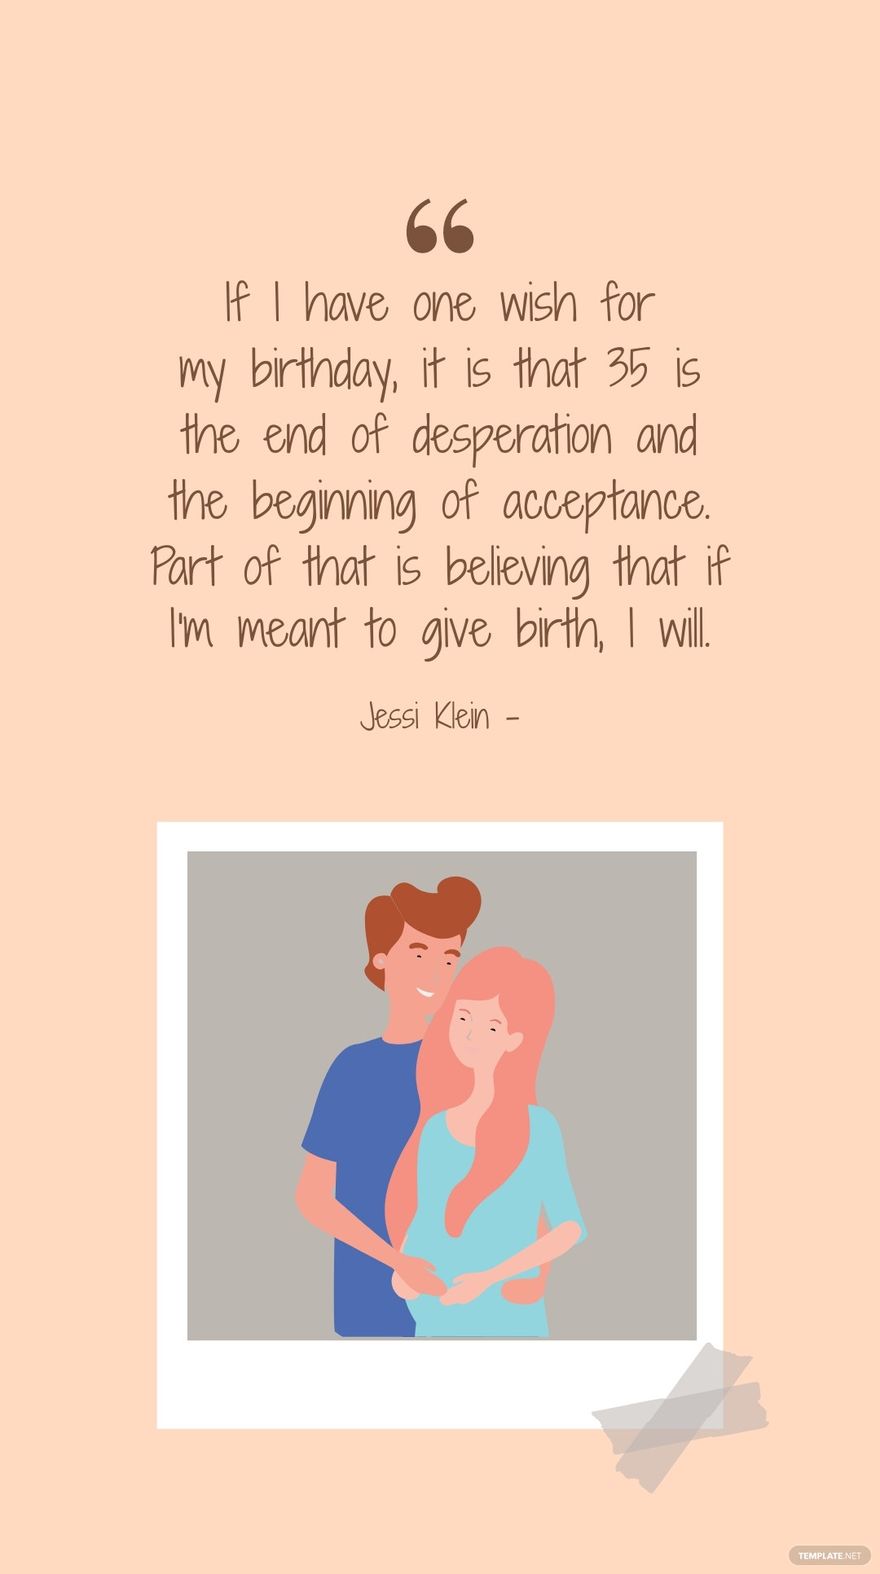 Jessi Klein - If I have one wish for my birthday, it is that 35 is the end of desperation and the beginning of acceptance. Part of that is believing that if I'm meant to give birth, I will.